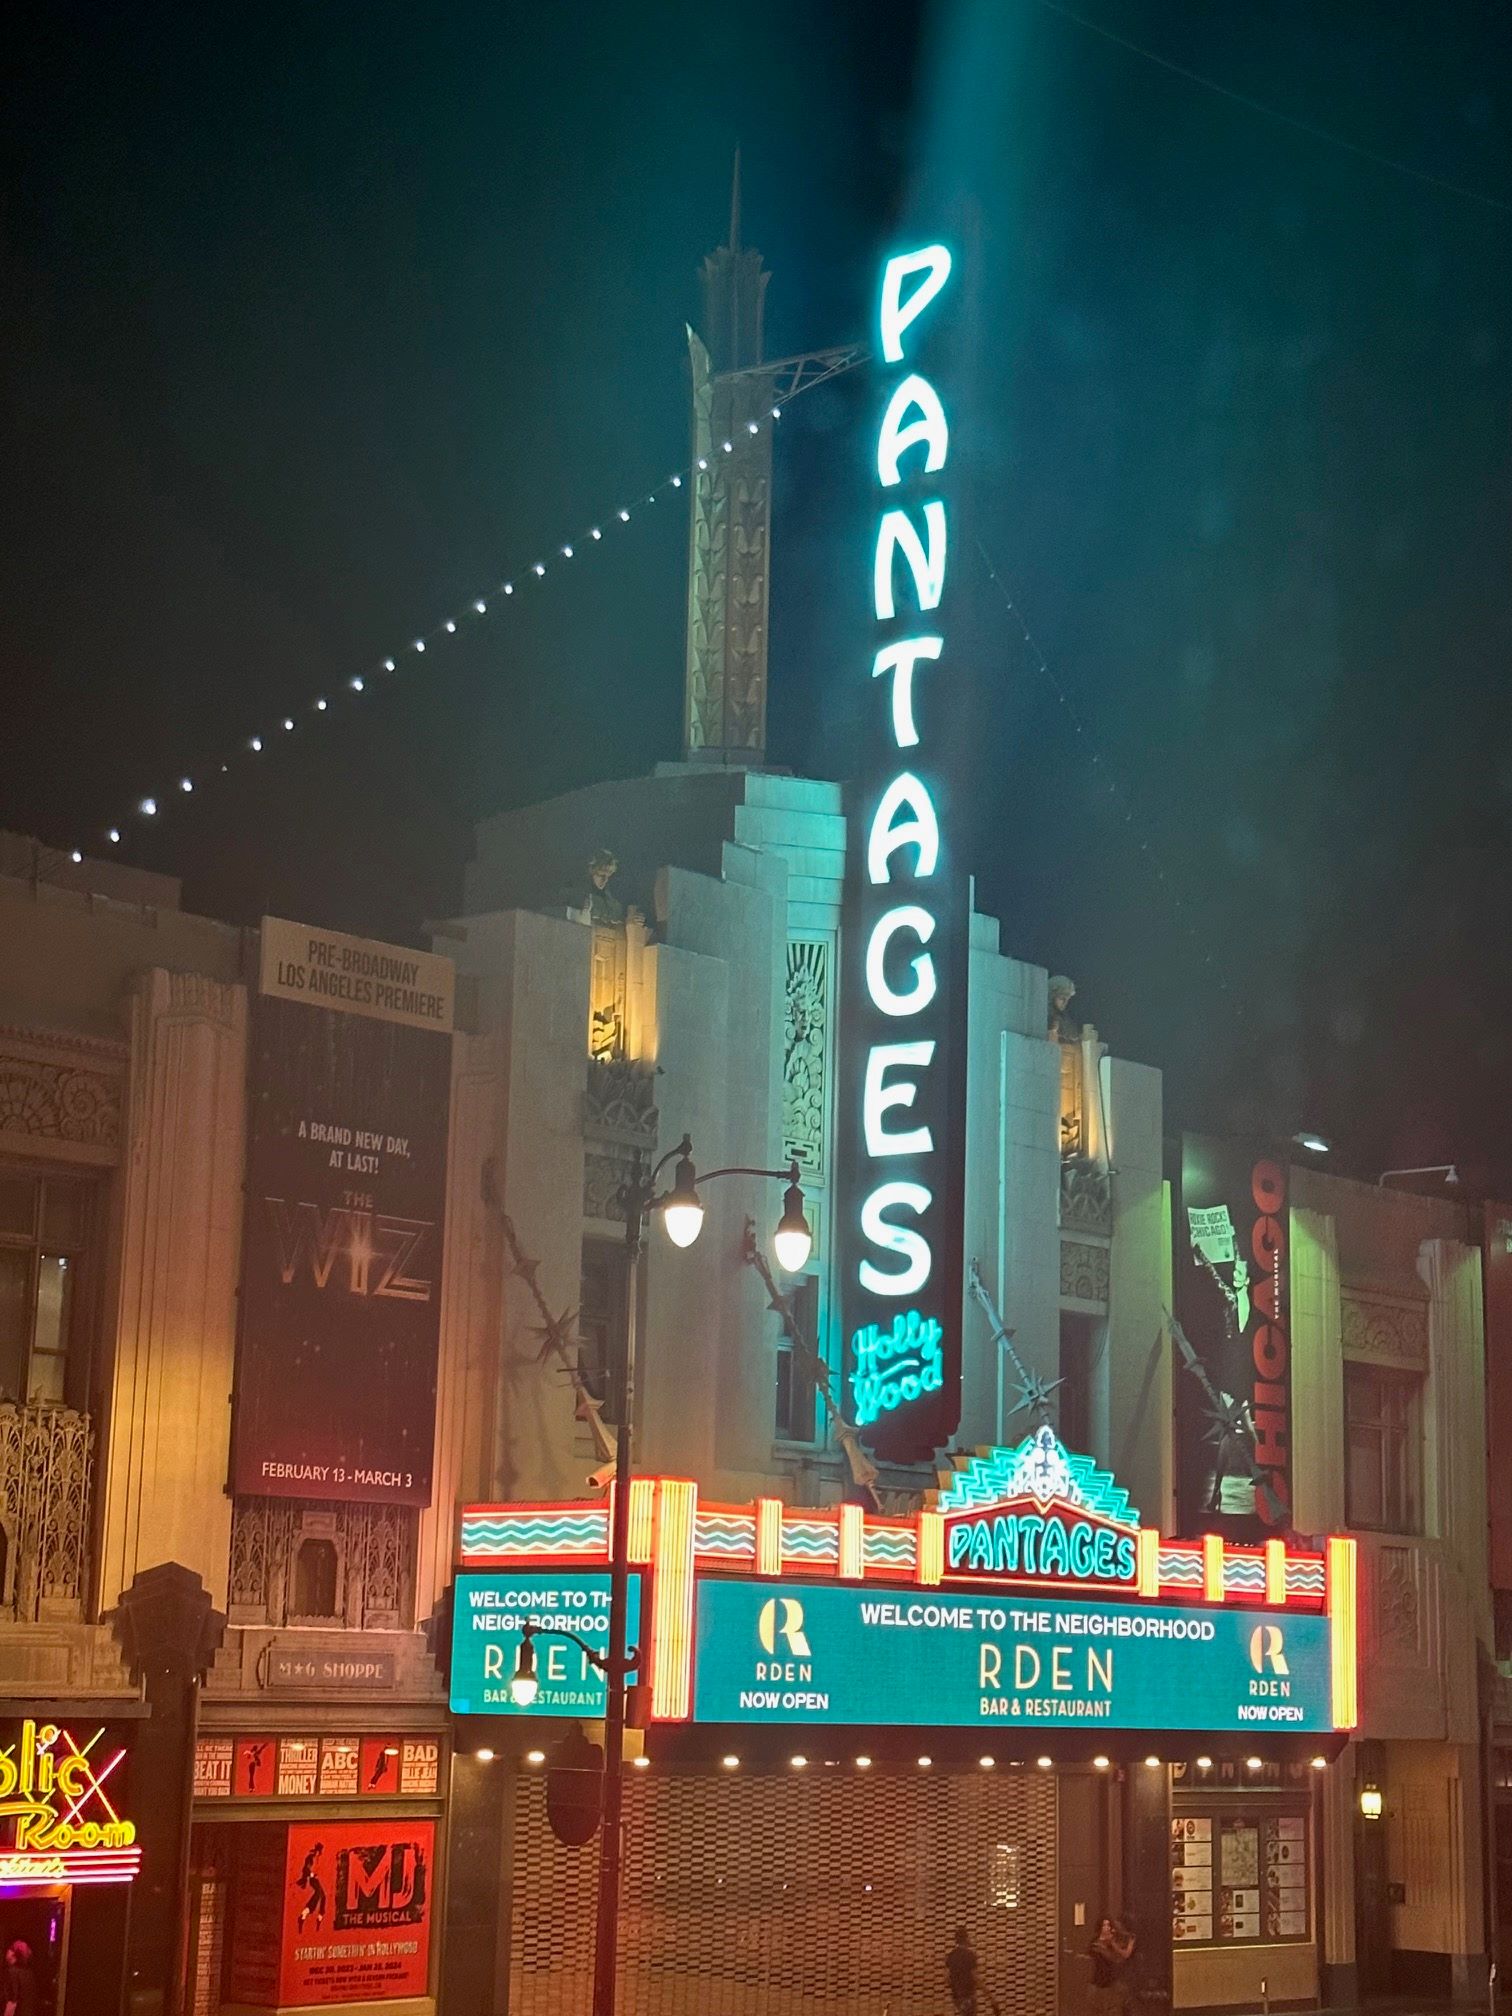 An image of the Hollywood Pantages.